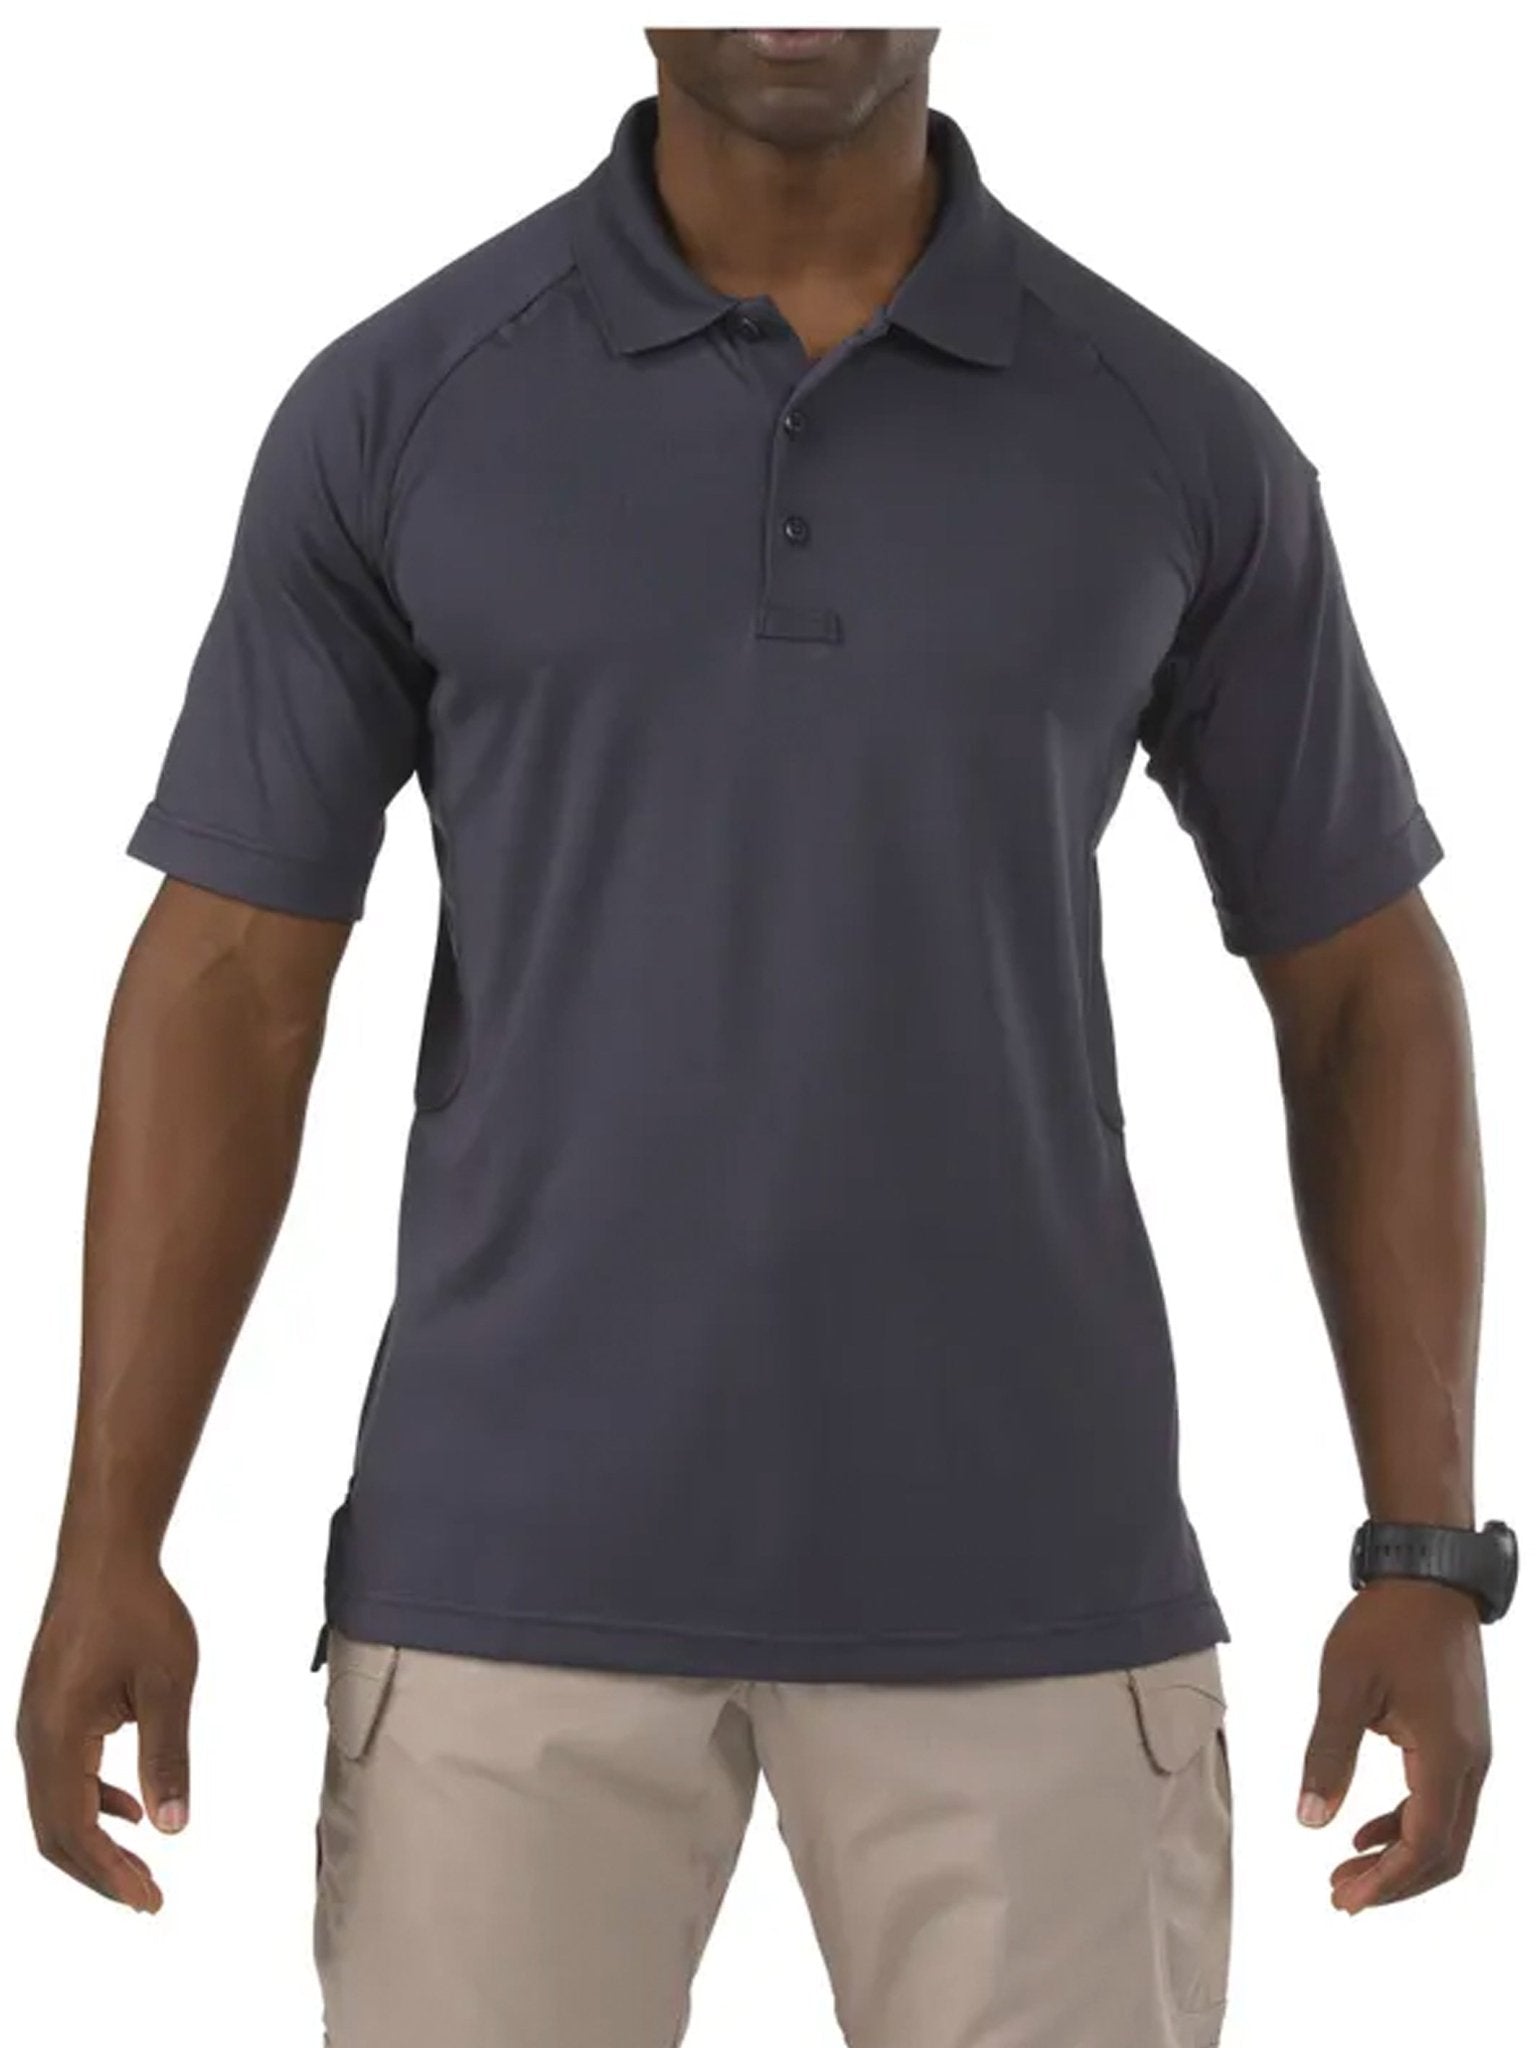 4elementsclothing5.11 Tactical5.11 Tactical - 5.11 Performance Short Sleeve Polo Shirt - Quick Dry moisture wicking - Style 71049T-Shirt71049-018-XS